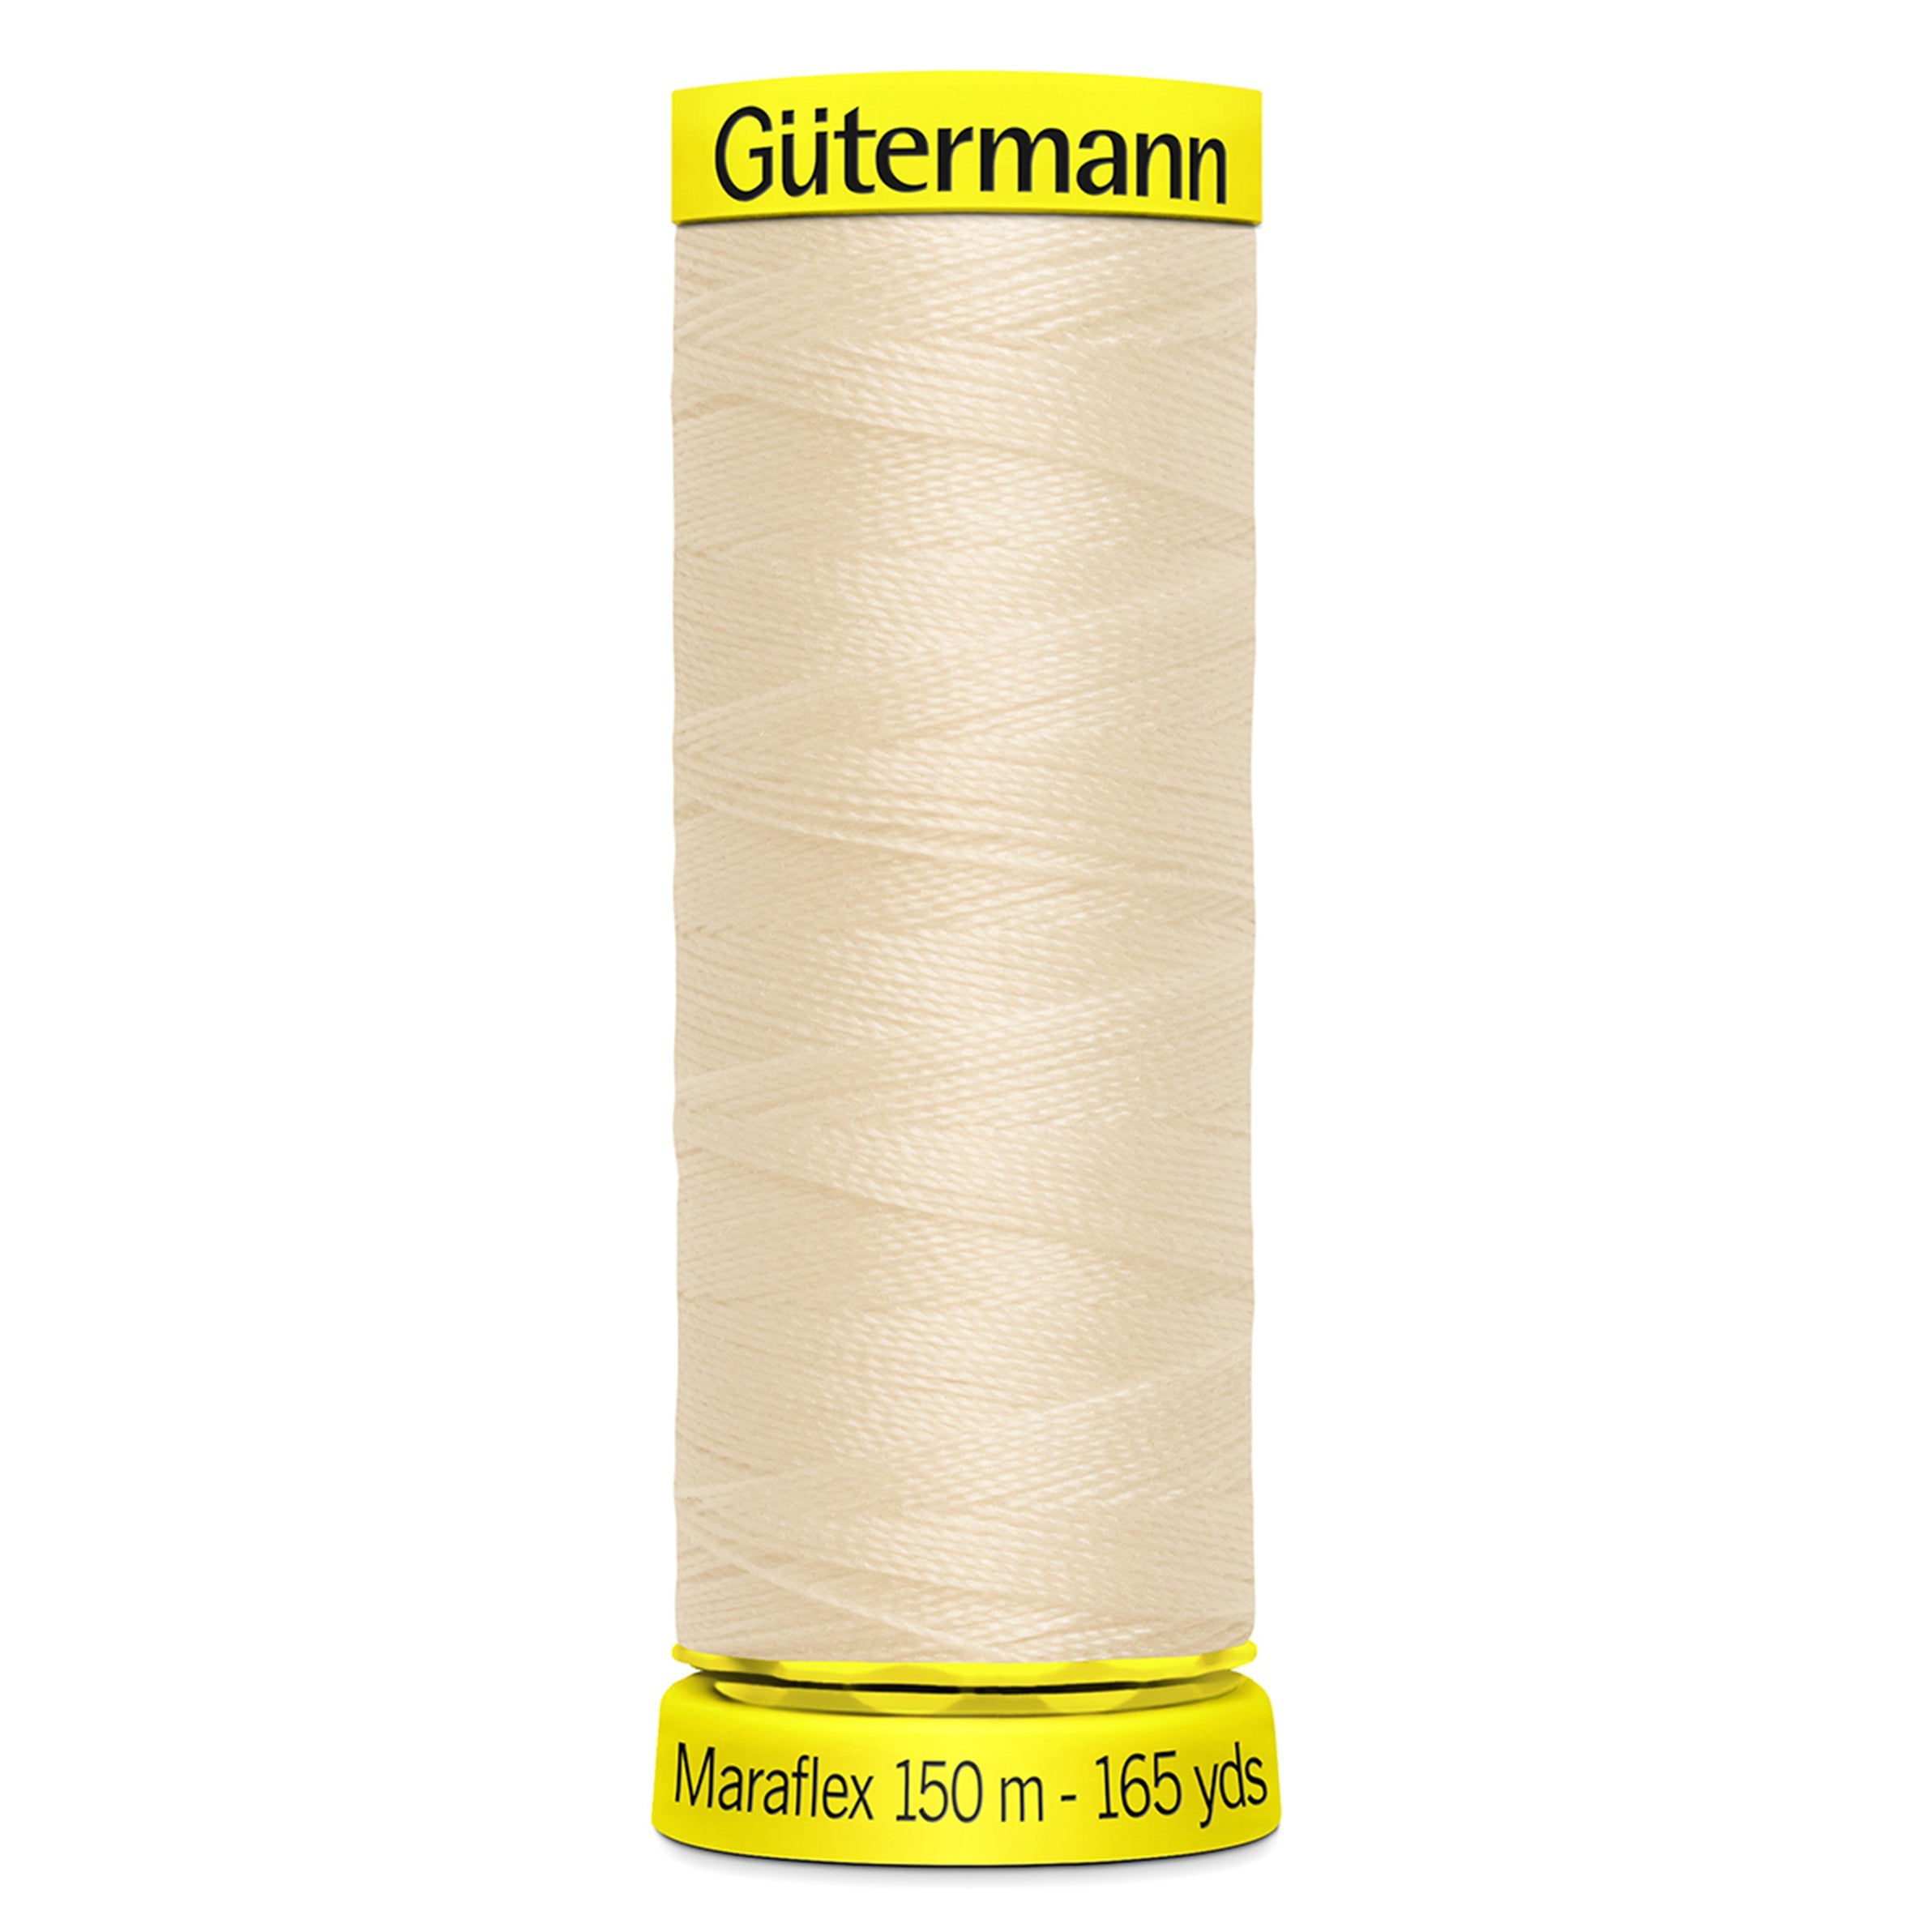 Gutermann Maraflex Stretchy Sewing Thread 150m colour 169 Cream from Jaycotts Sewing Supplies